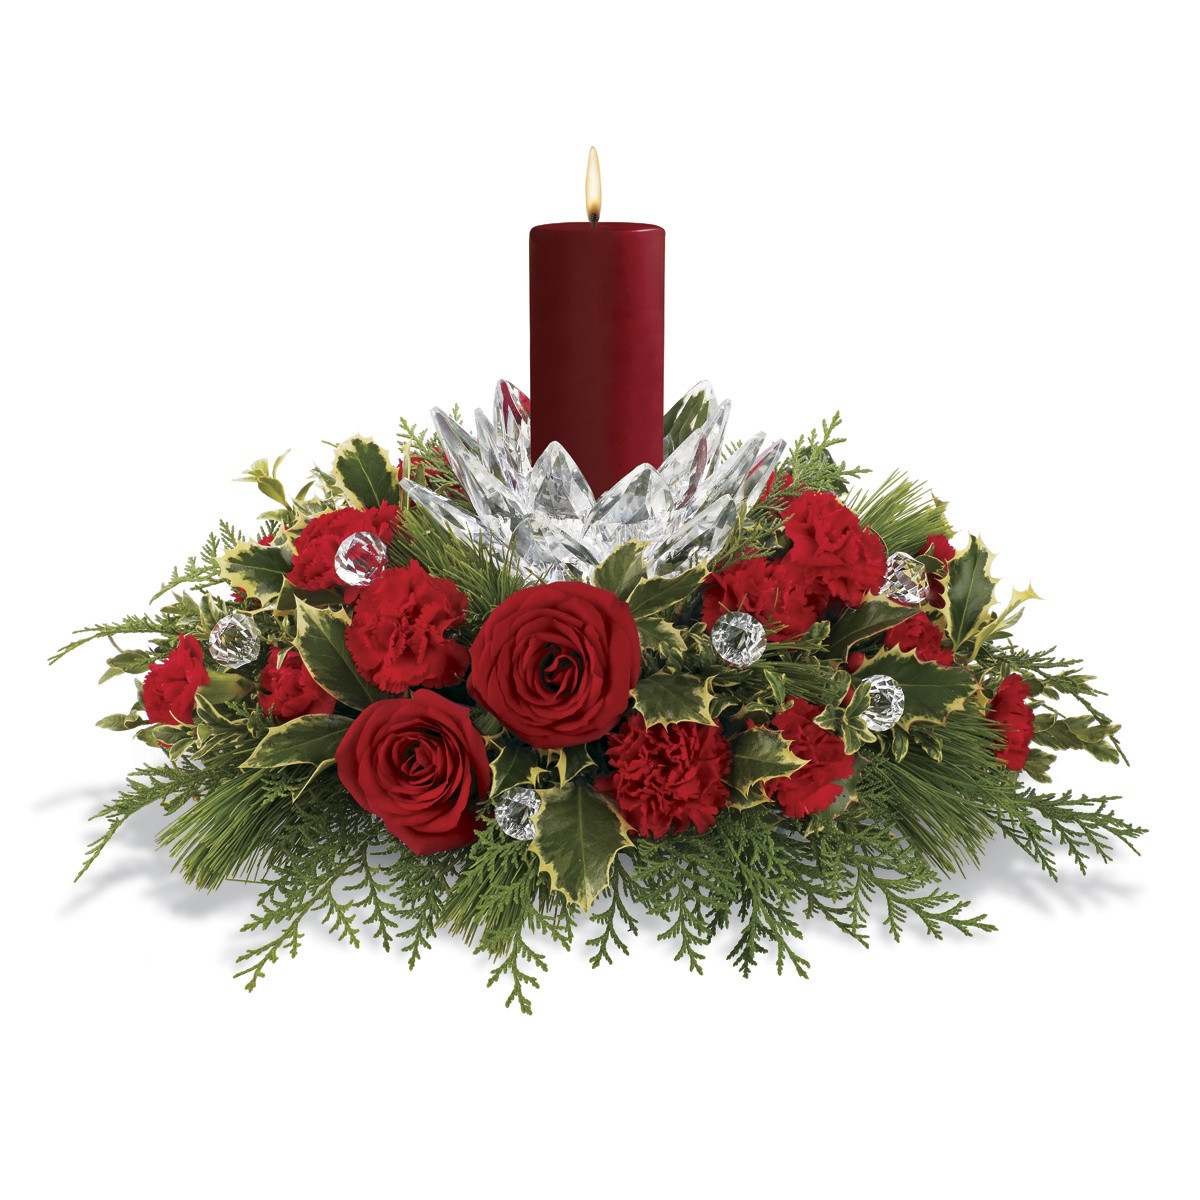 Christmas Flower Images
 Give Holiday Cheer with Designer Floral Arrangements and